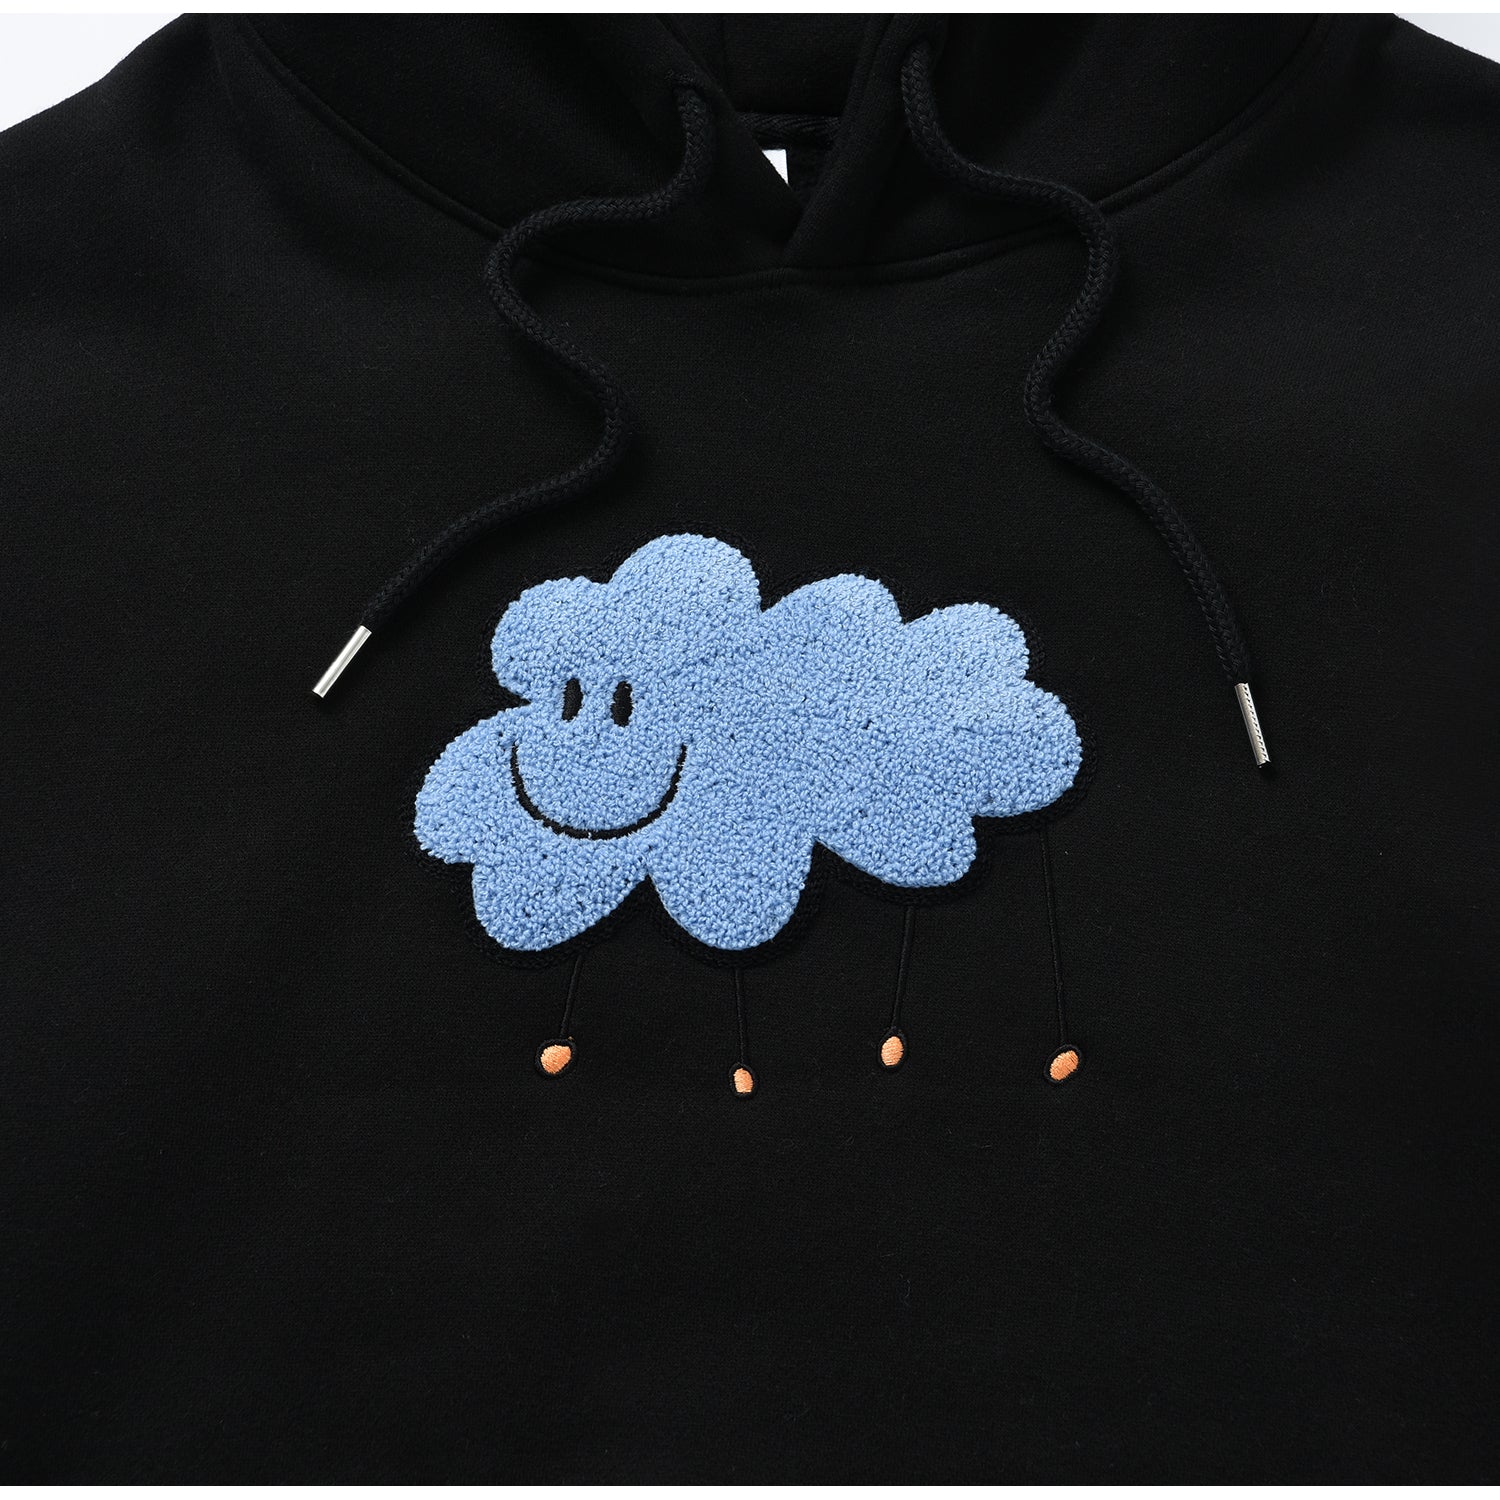 Dominant Cloud Embroidery Dried Hoody_BLACK